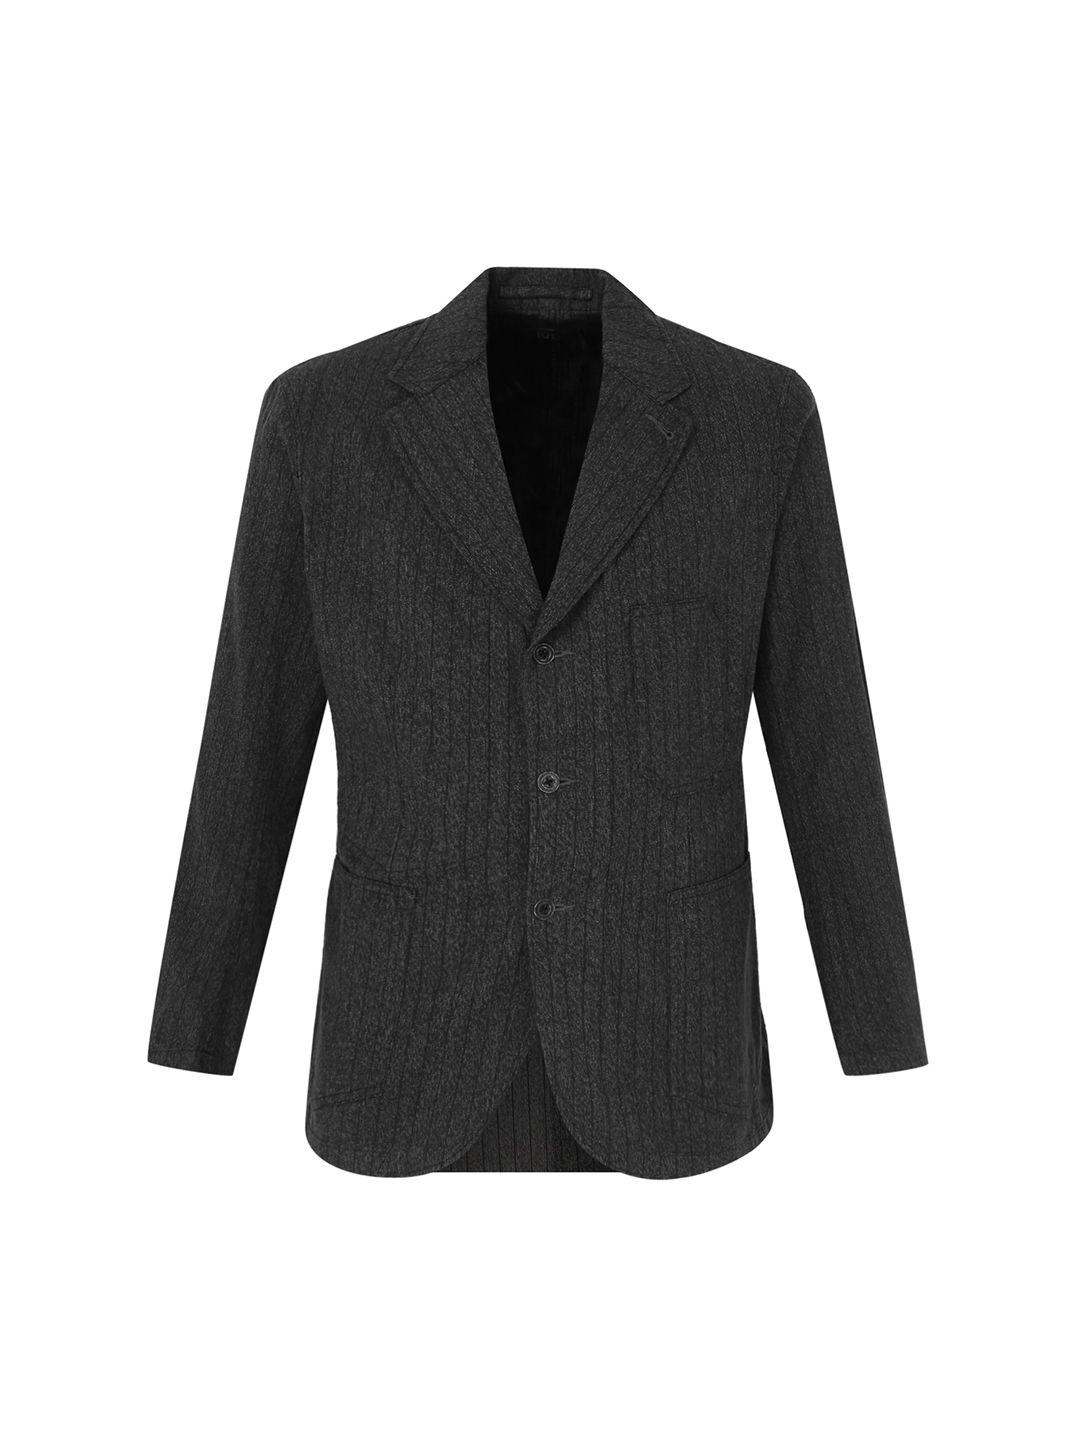 polo ralph lauren men black tailored jacket with embroidered